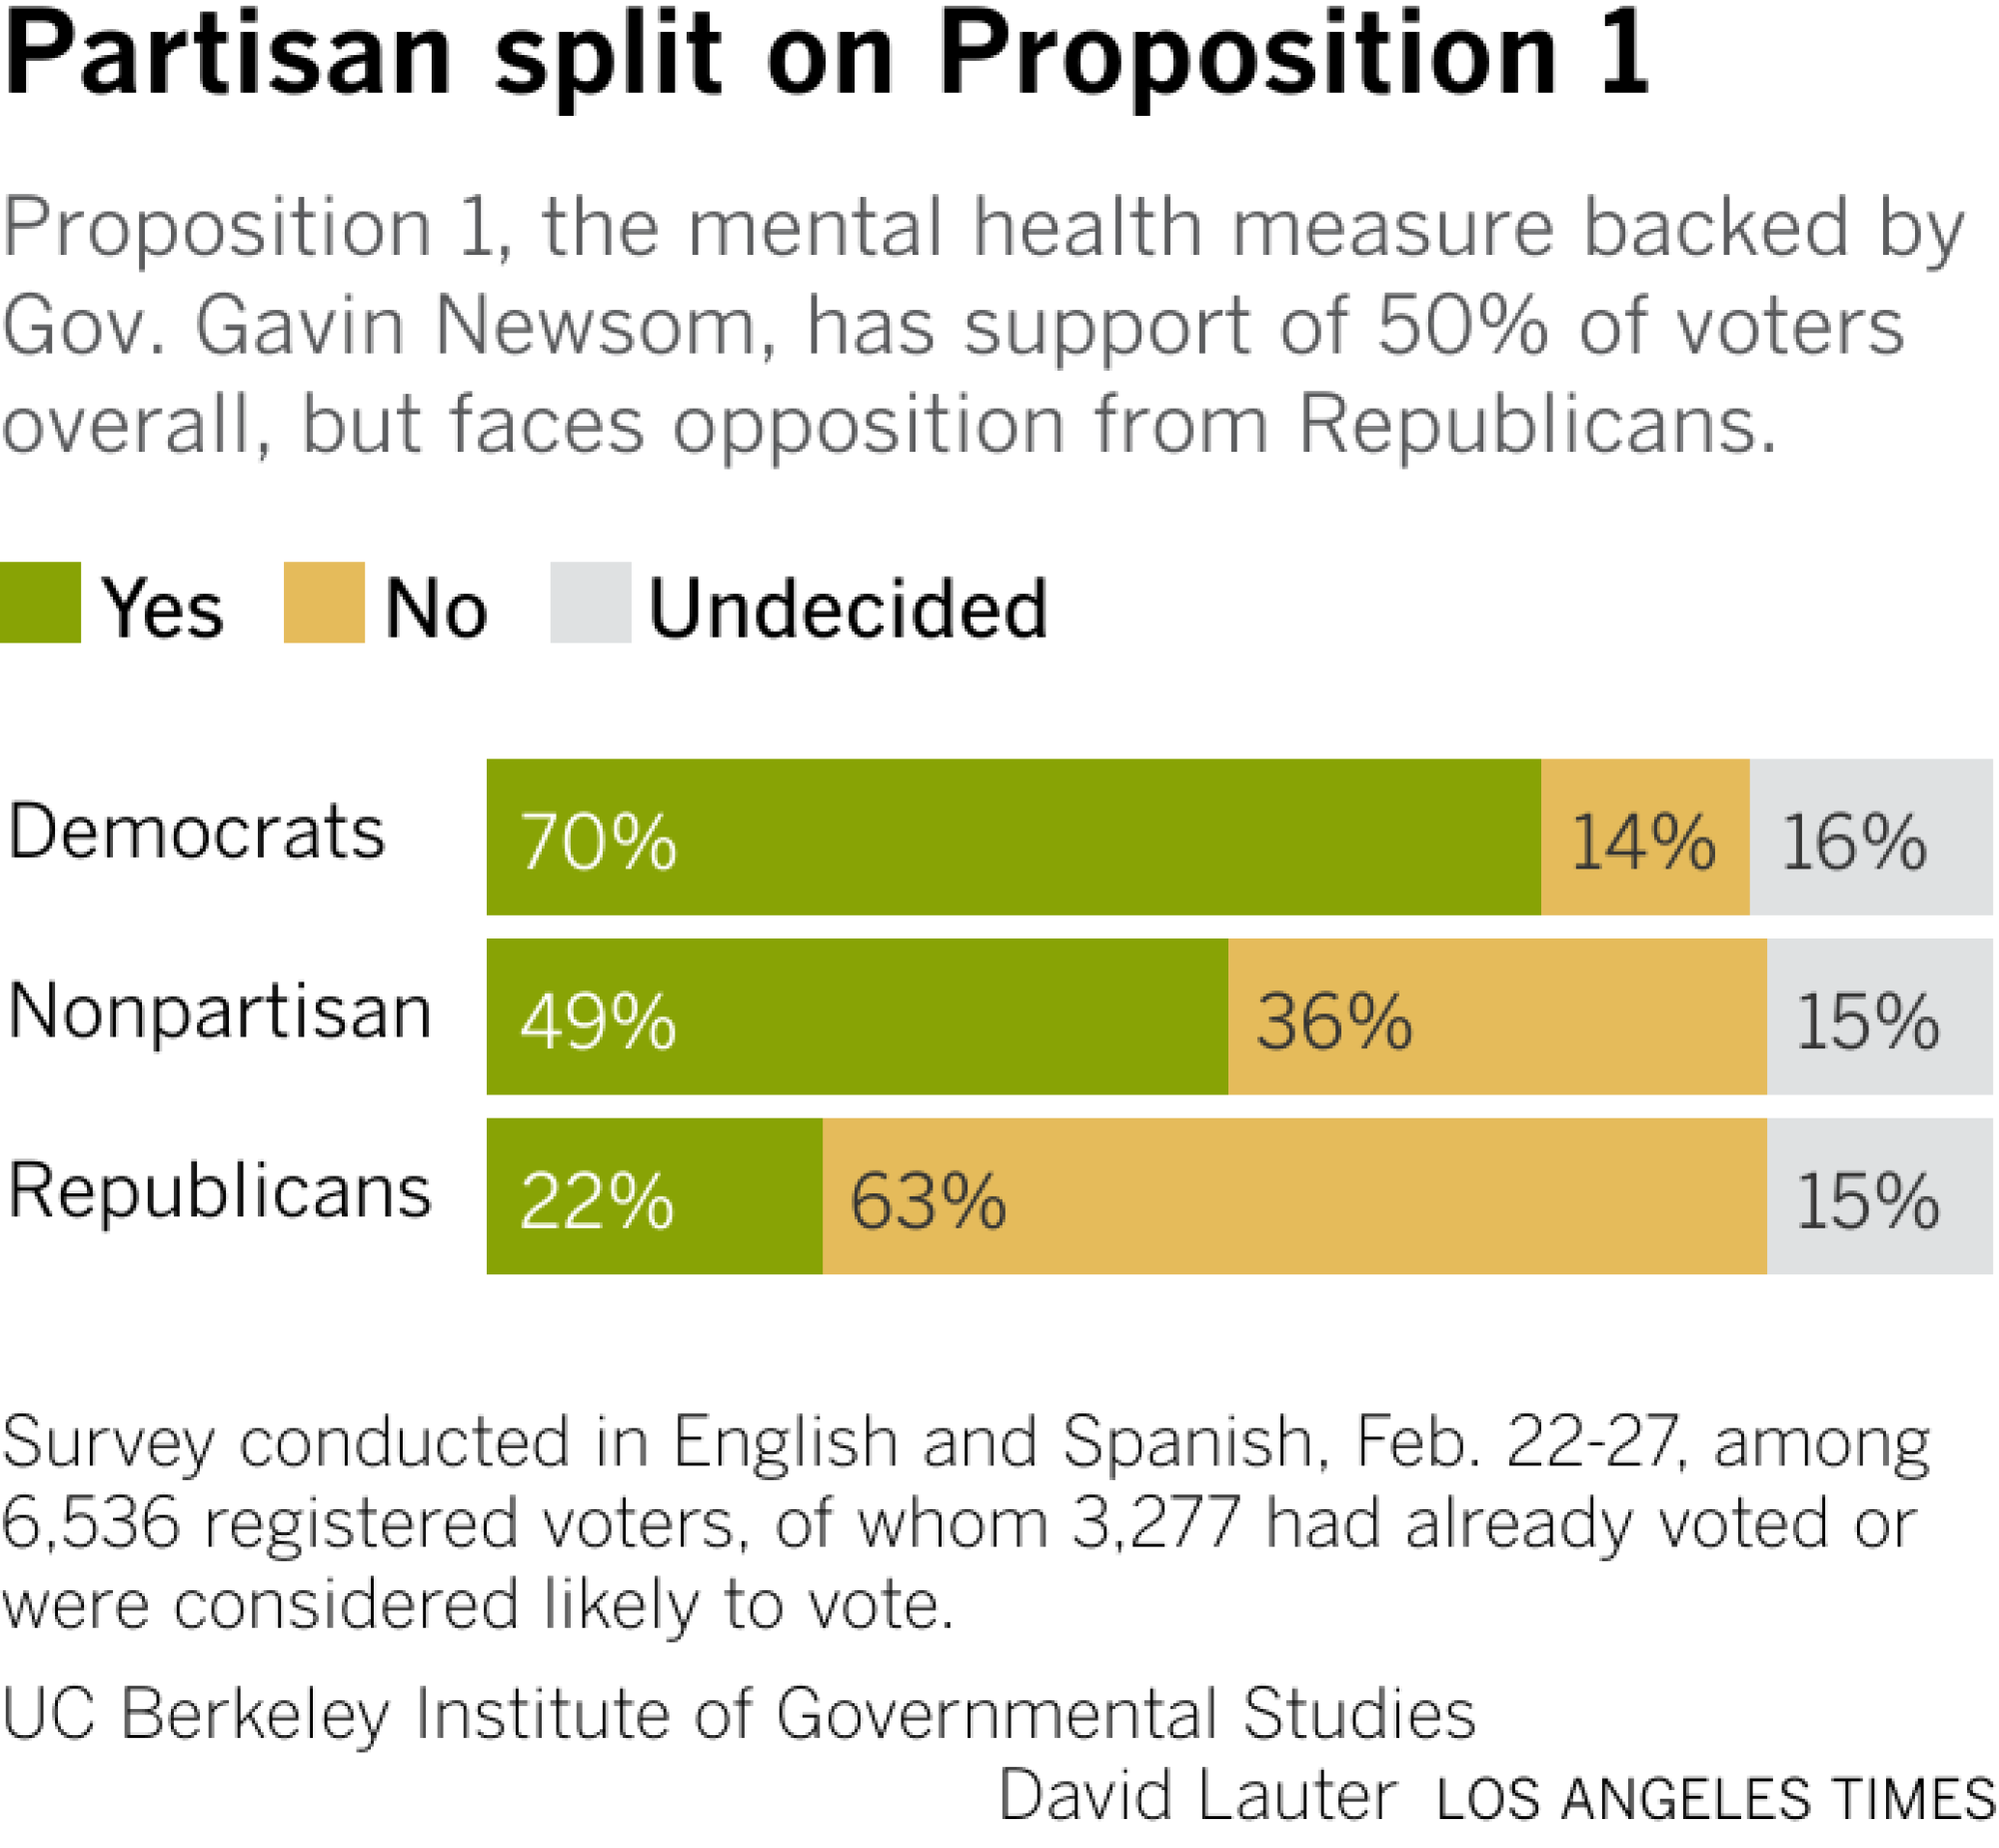 Bars show the share of Democrats, Nonpartisan voters and Republicans who support or oppose Proposition 1.